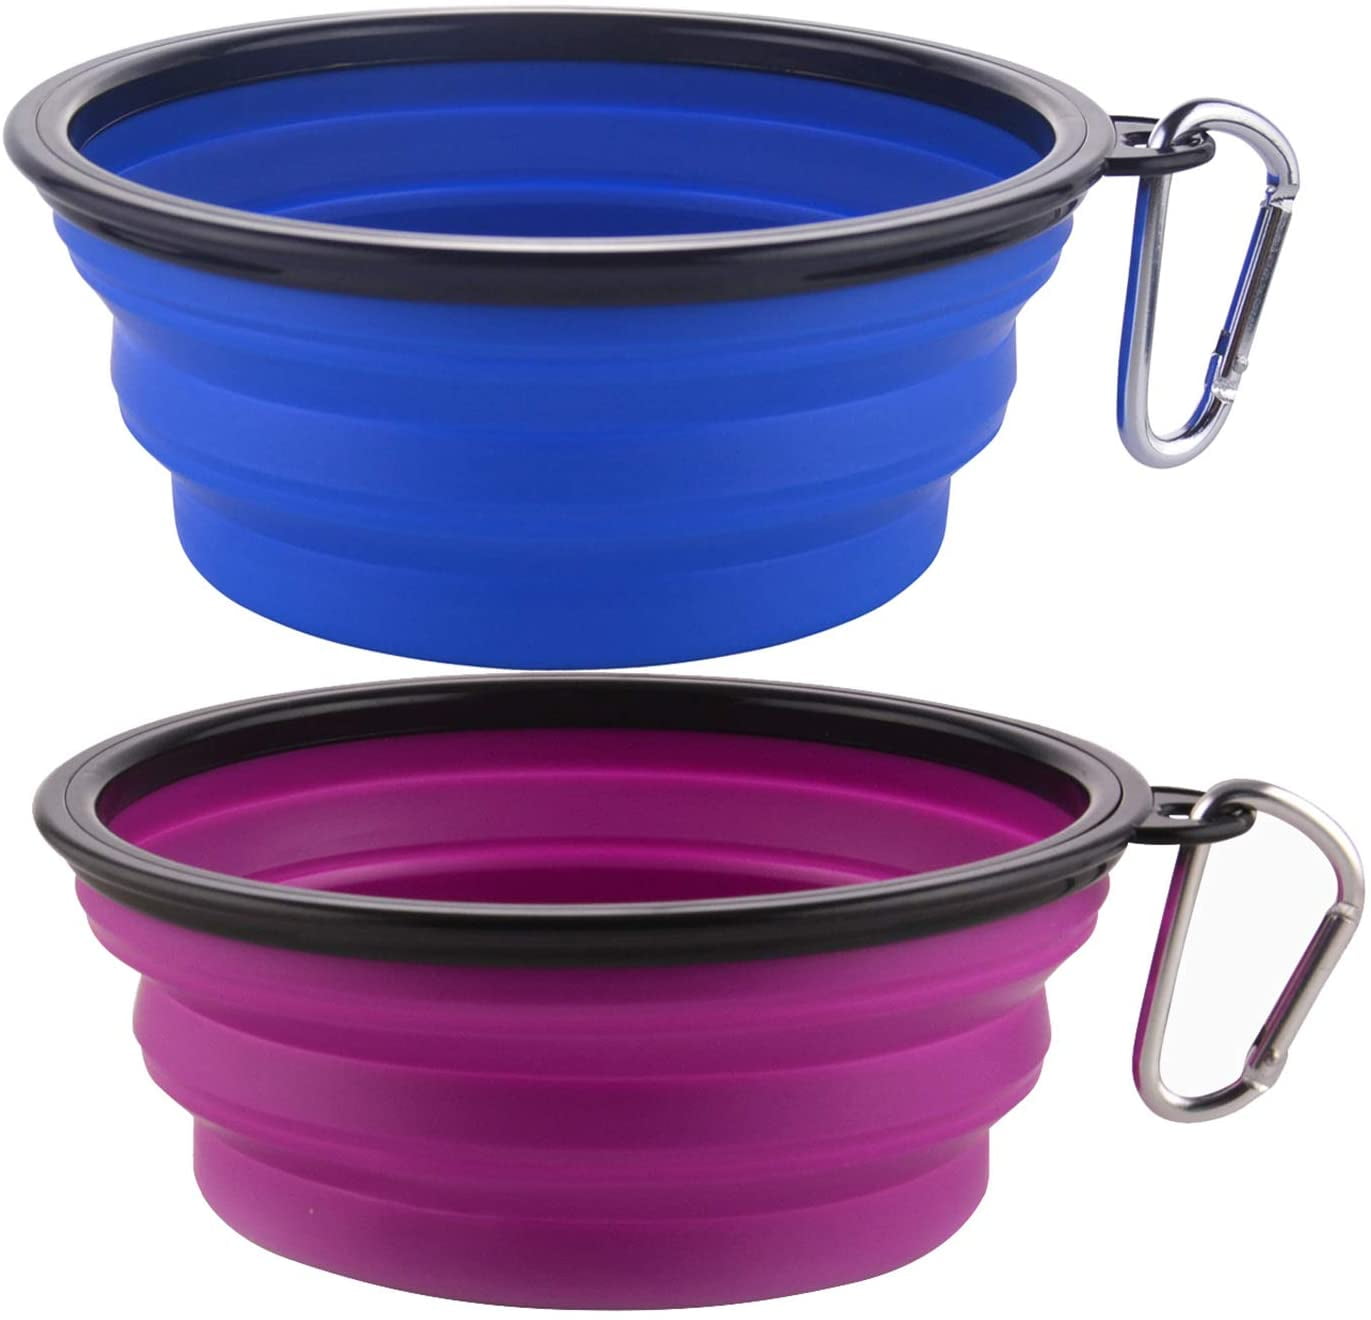 Camping Collapsible Bowl Travel Portable Water Dish 